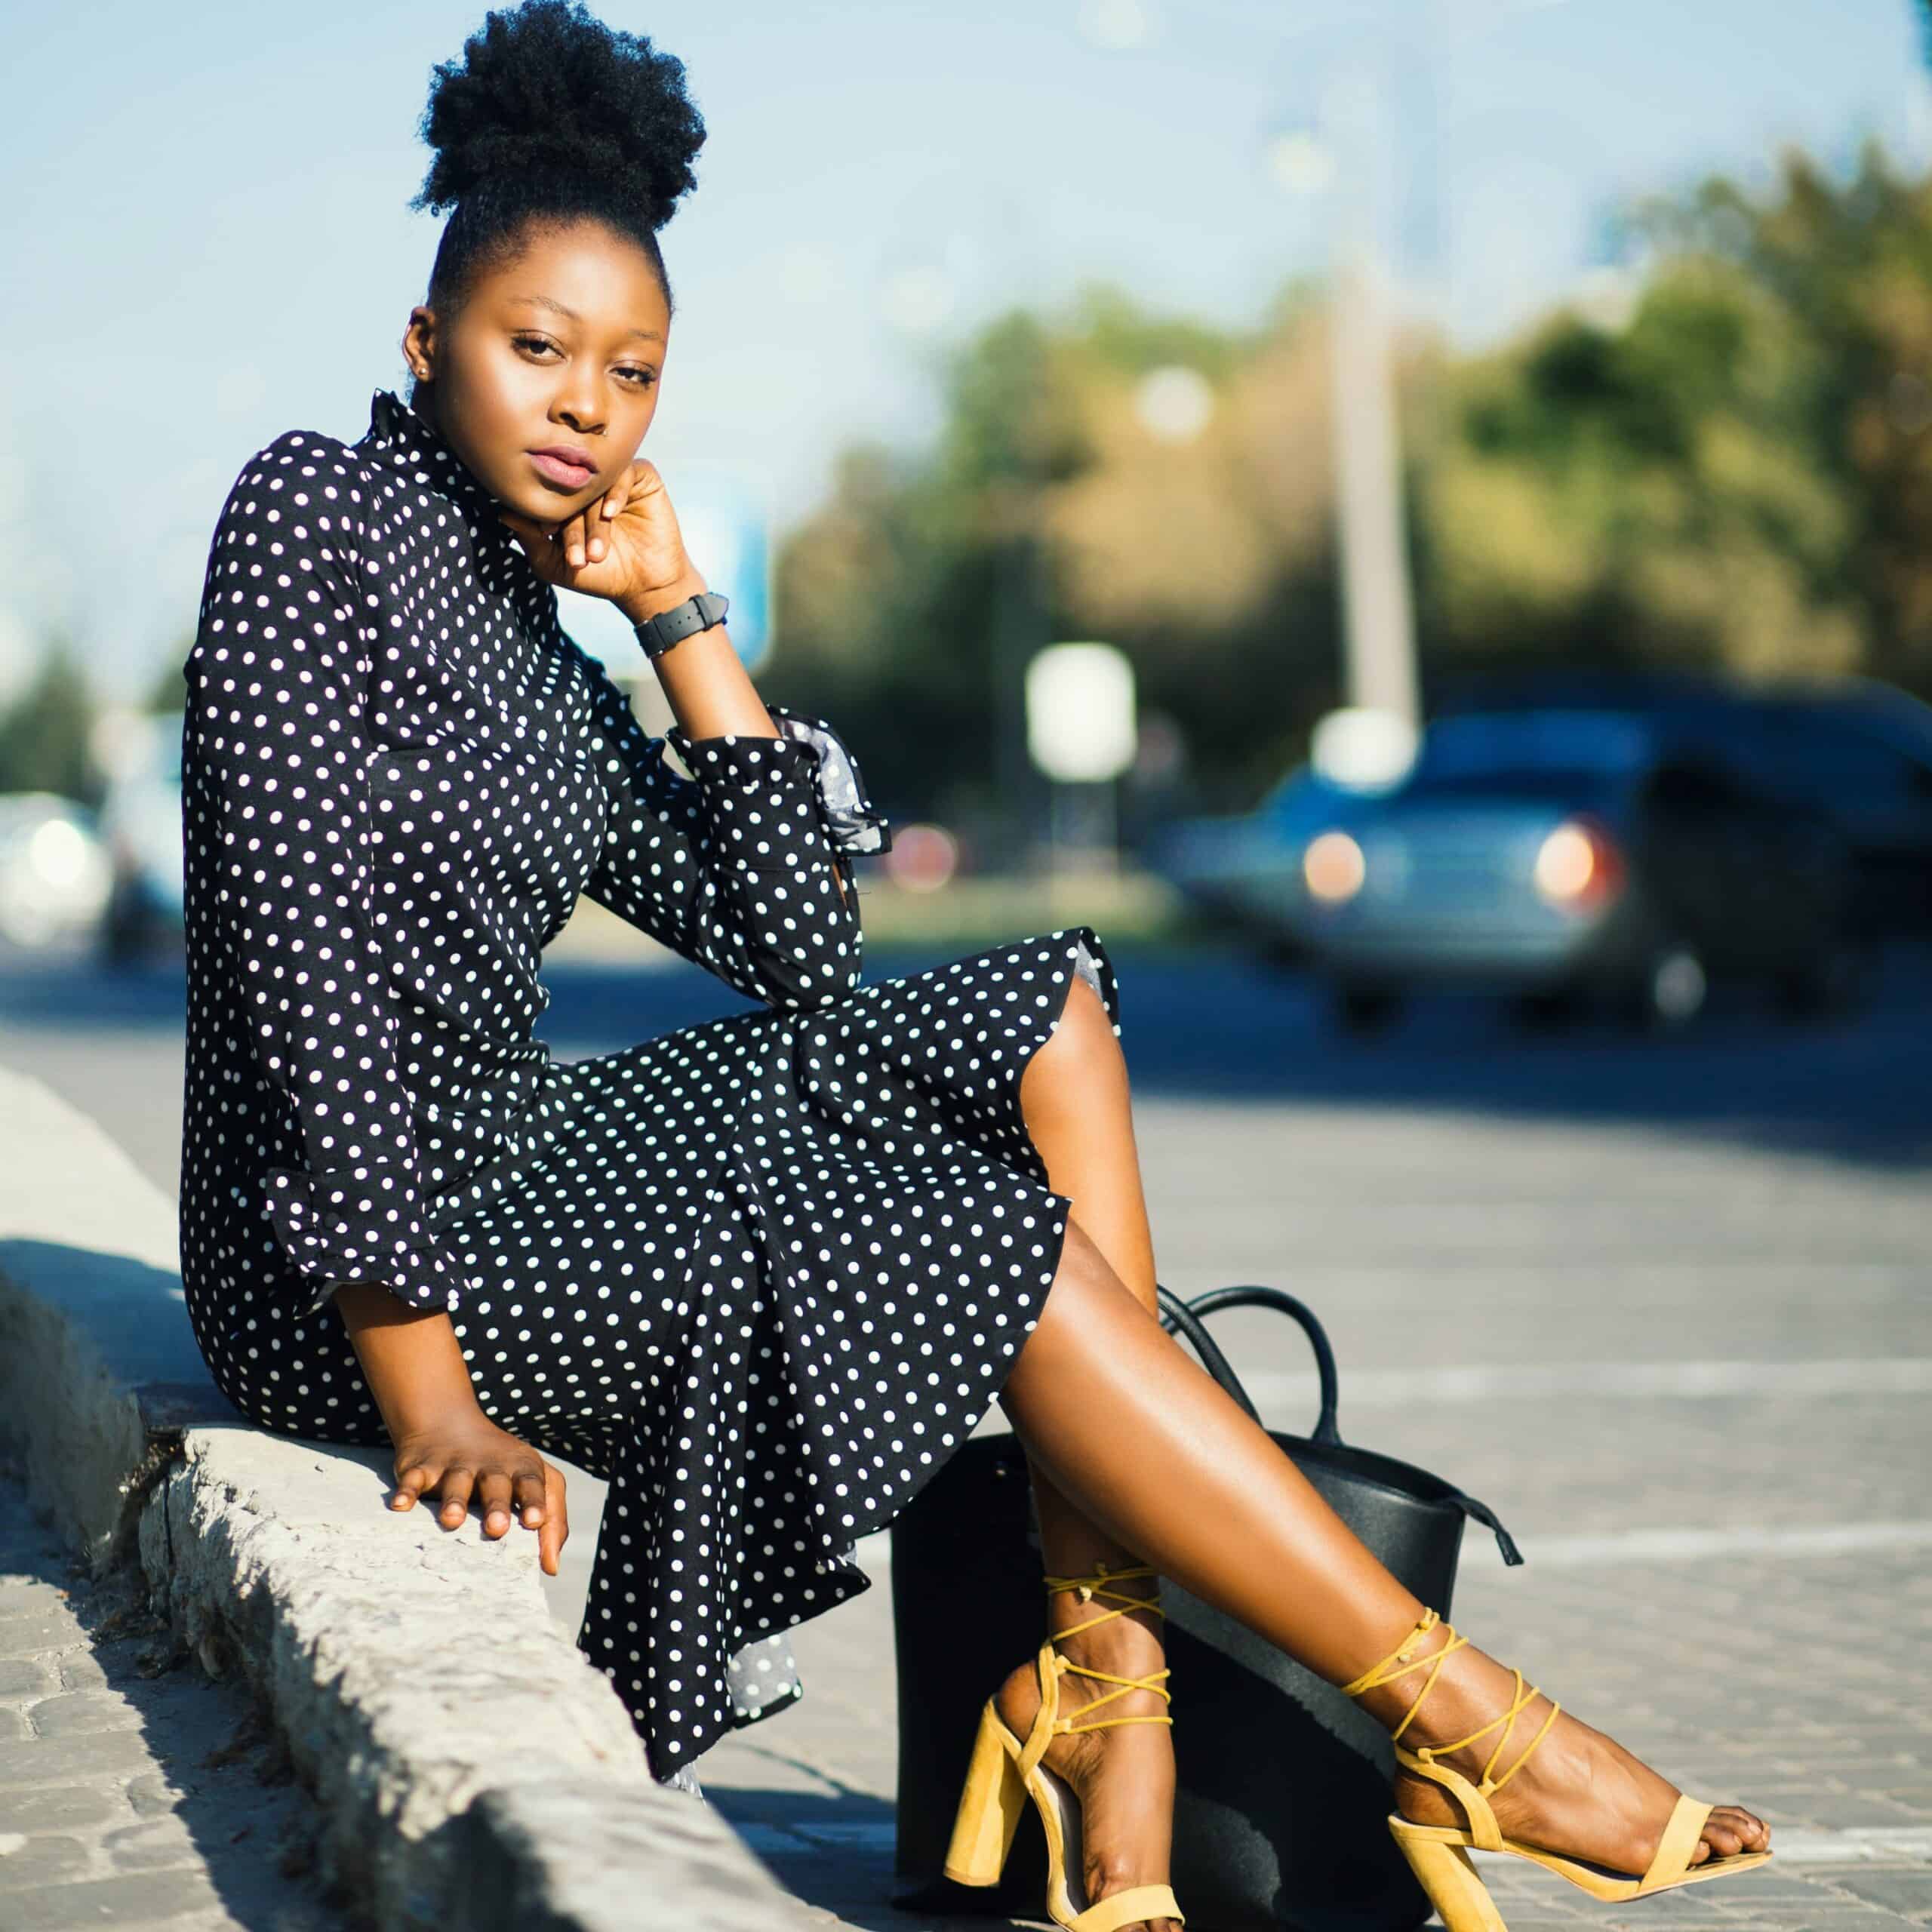 What Shoes To Wear With Polka Dot Dresses? 7 Spot-On Tips